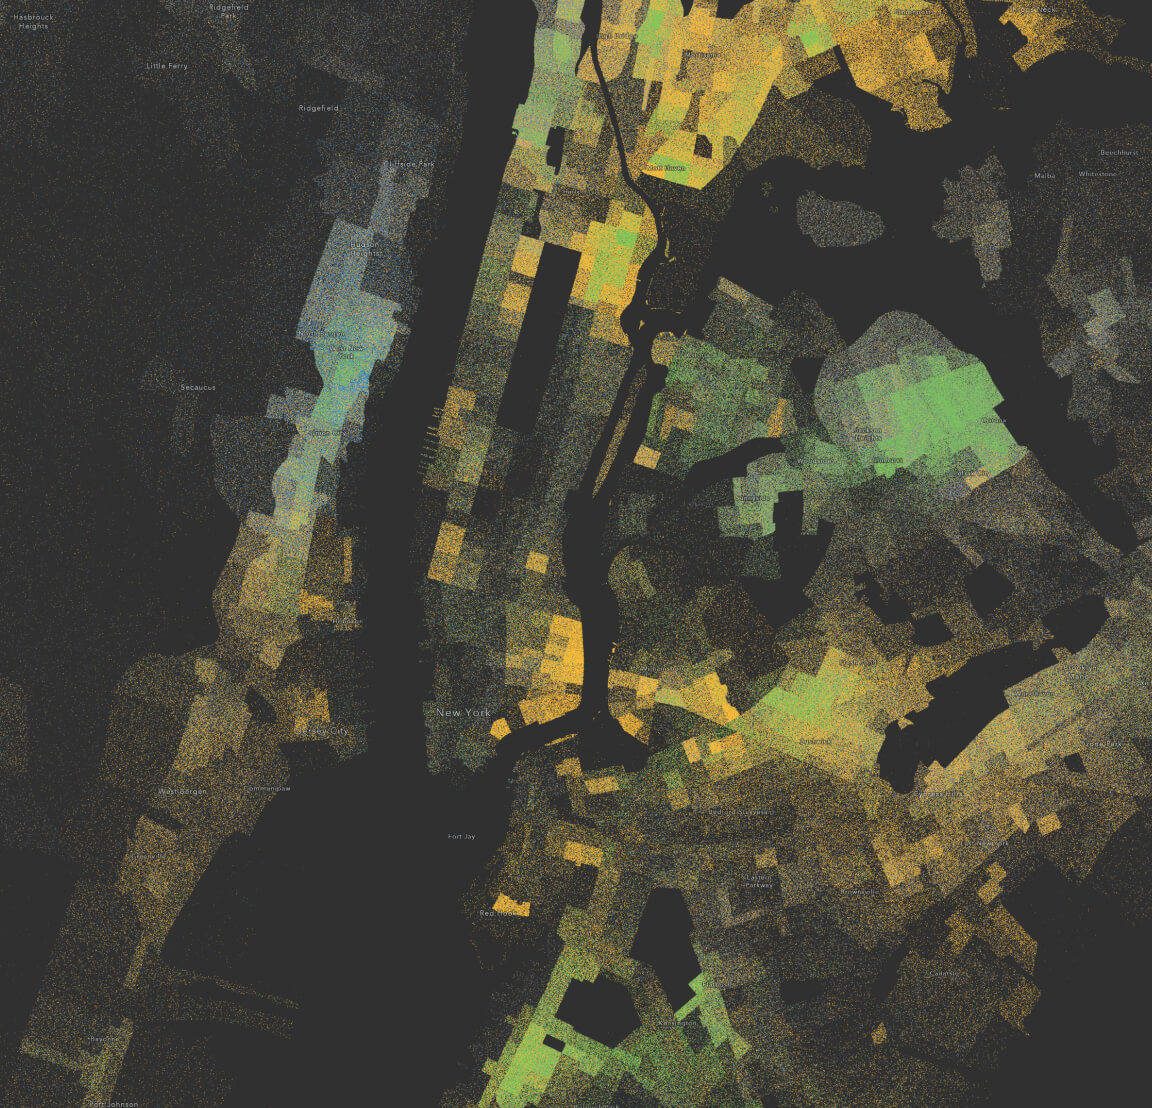 An abstract map in green and yellow on a dark background